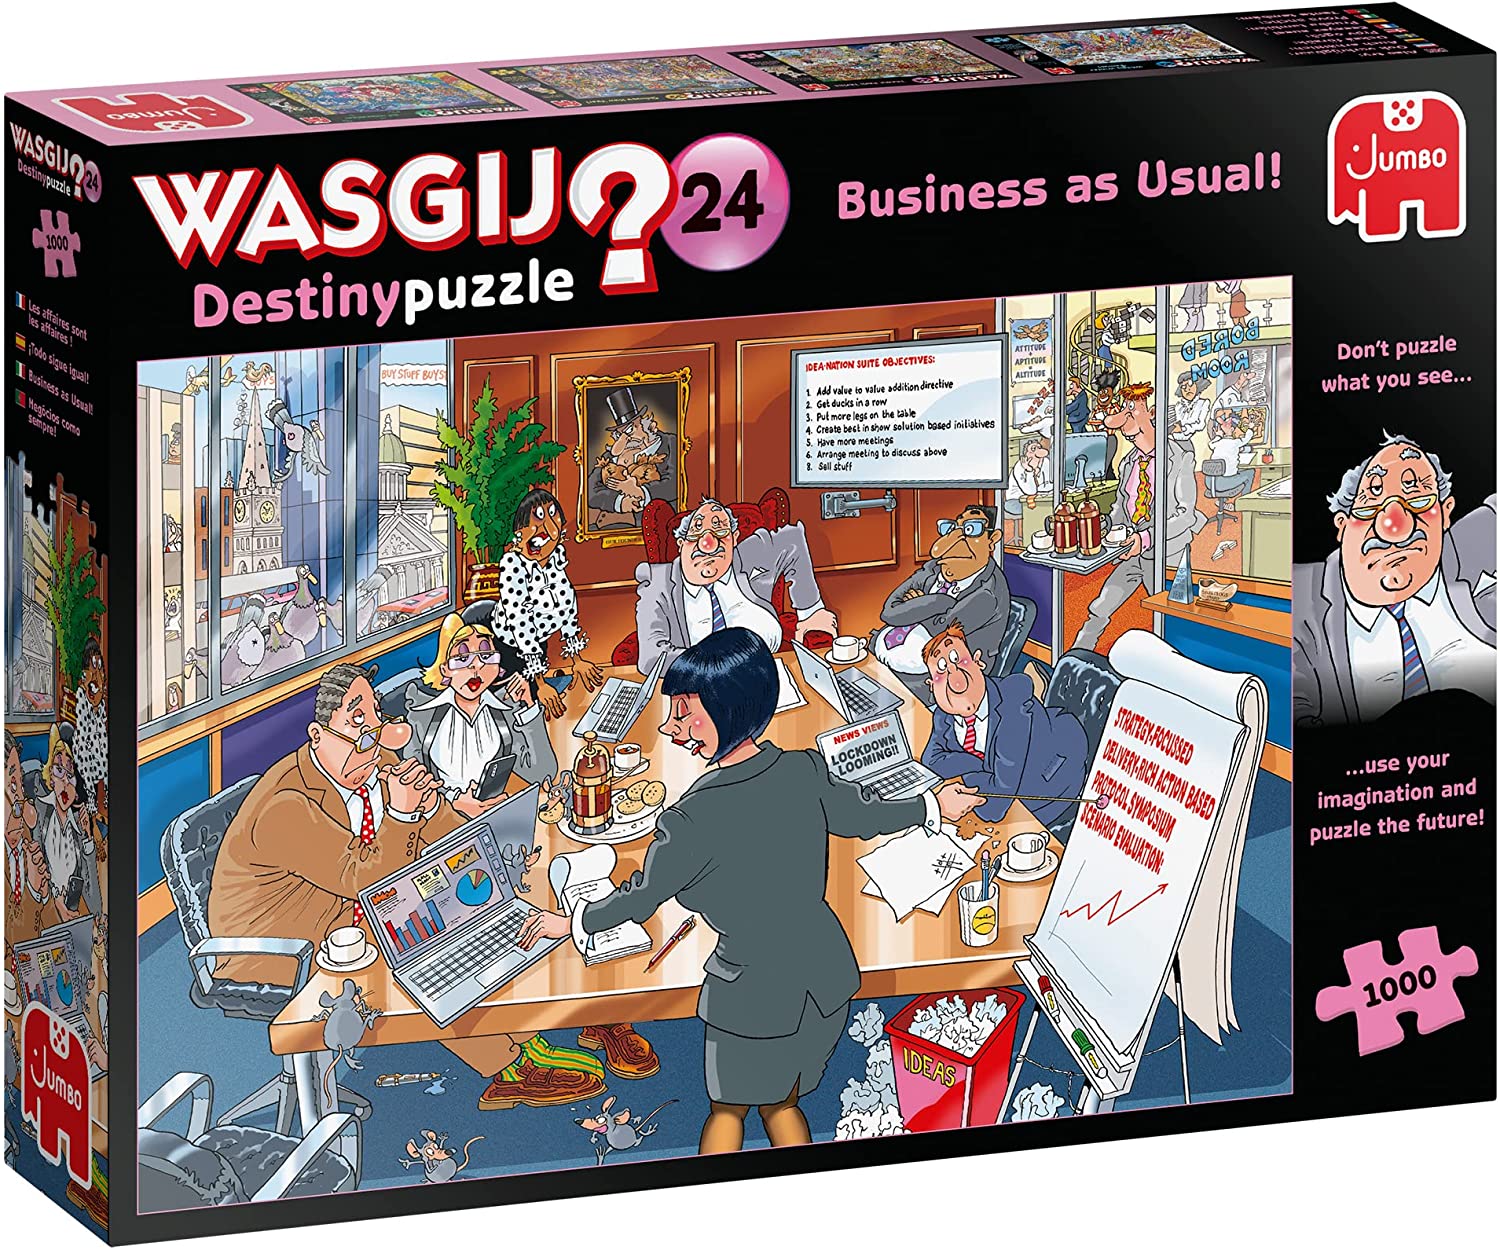 Wasgij Destiny 24 Business as Usual! Jigsaw Puzzle (1000 Pieces)